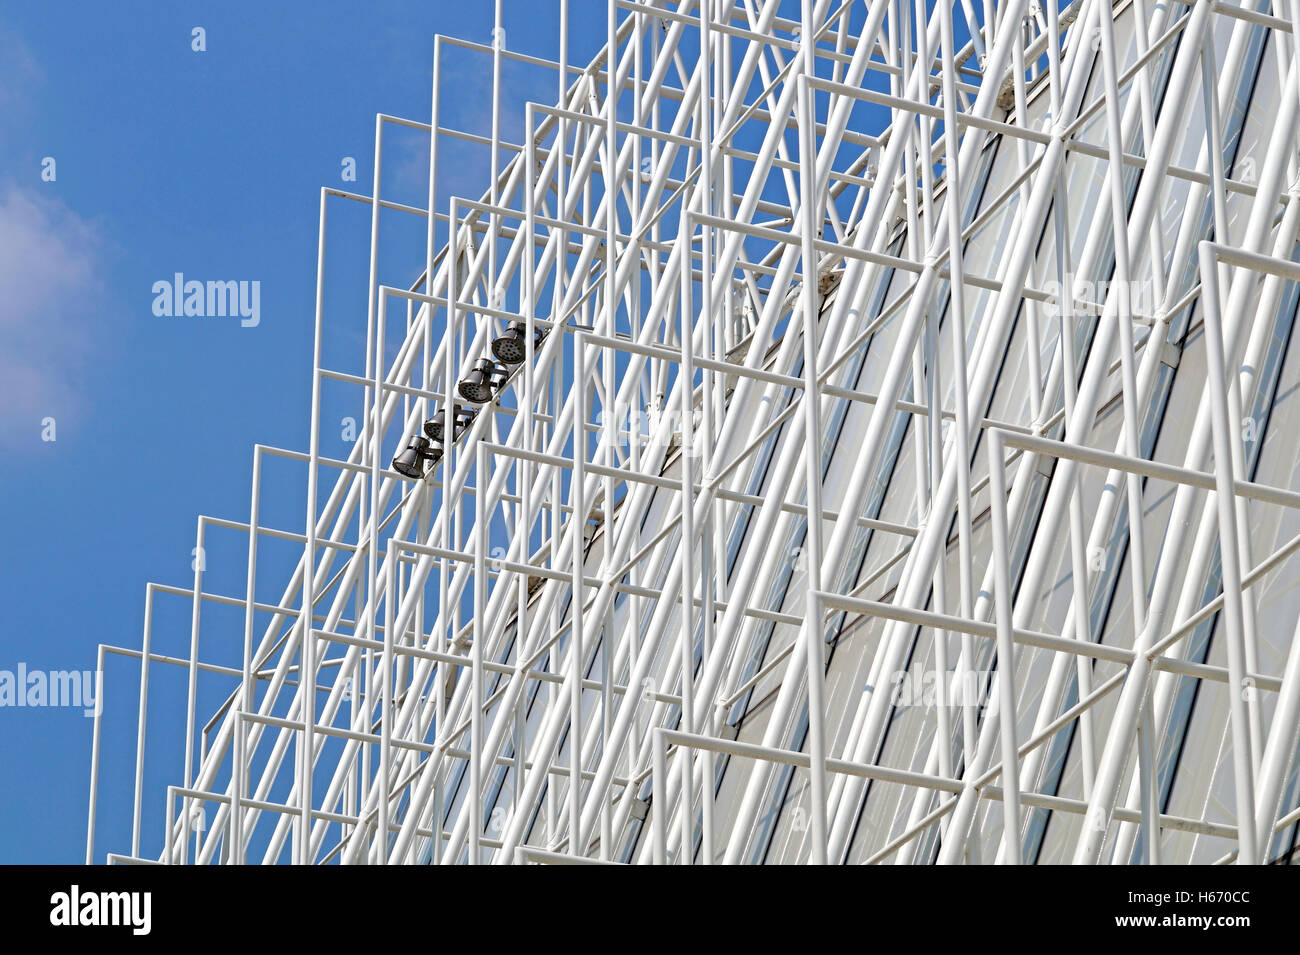 metal structure with lights Stock Photo